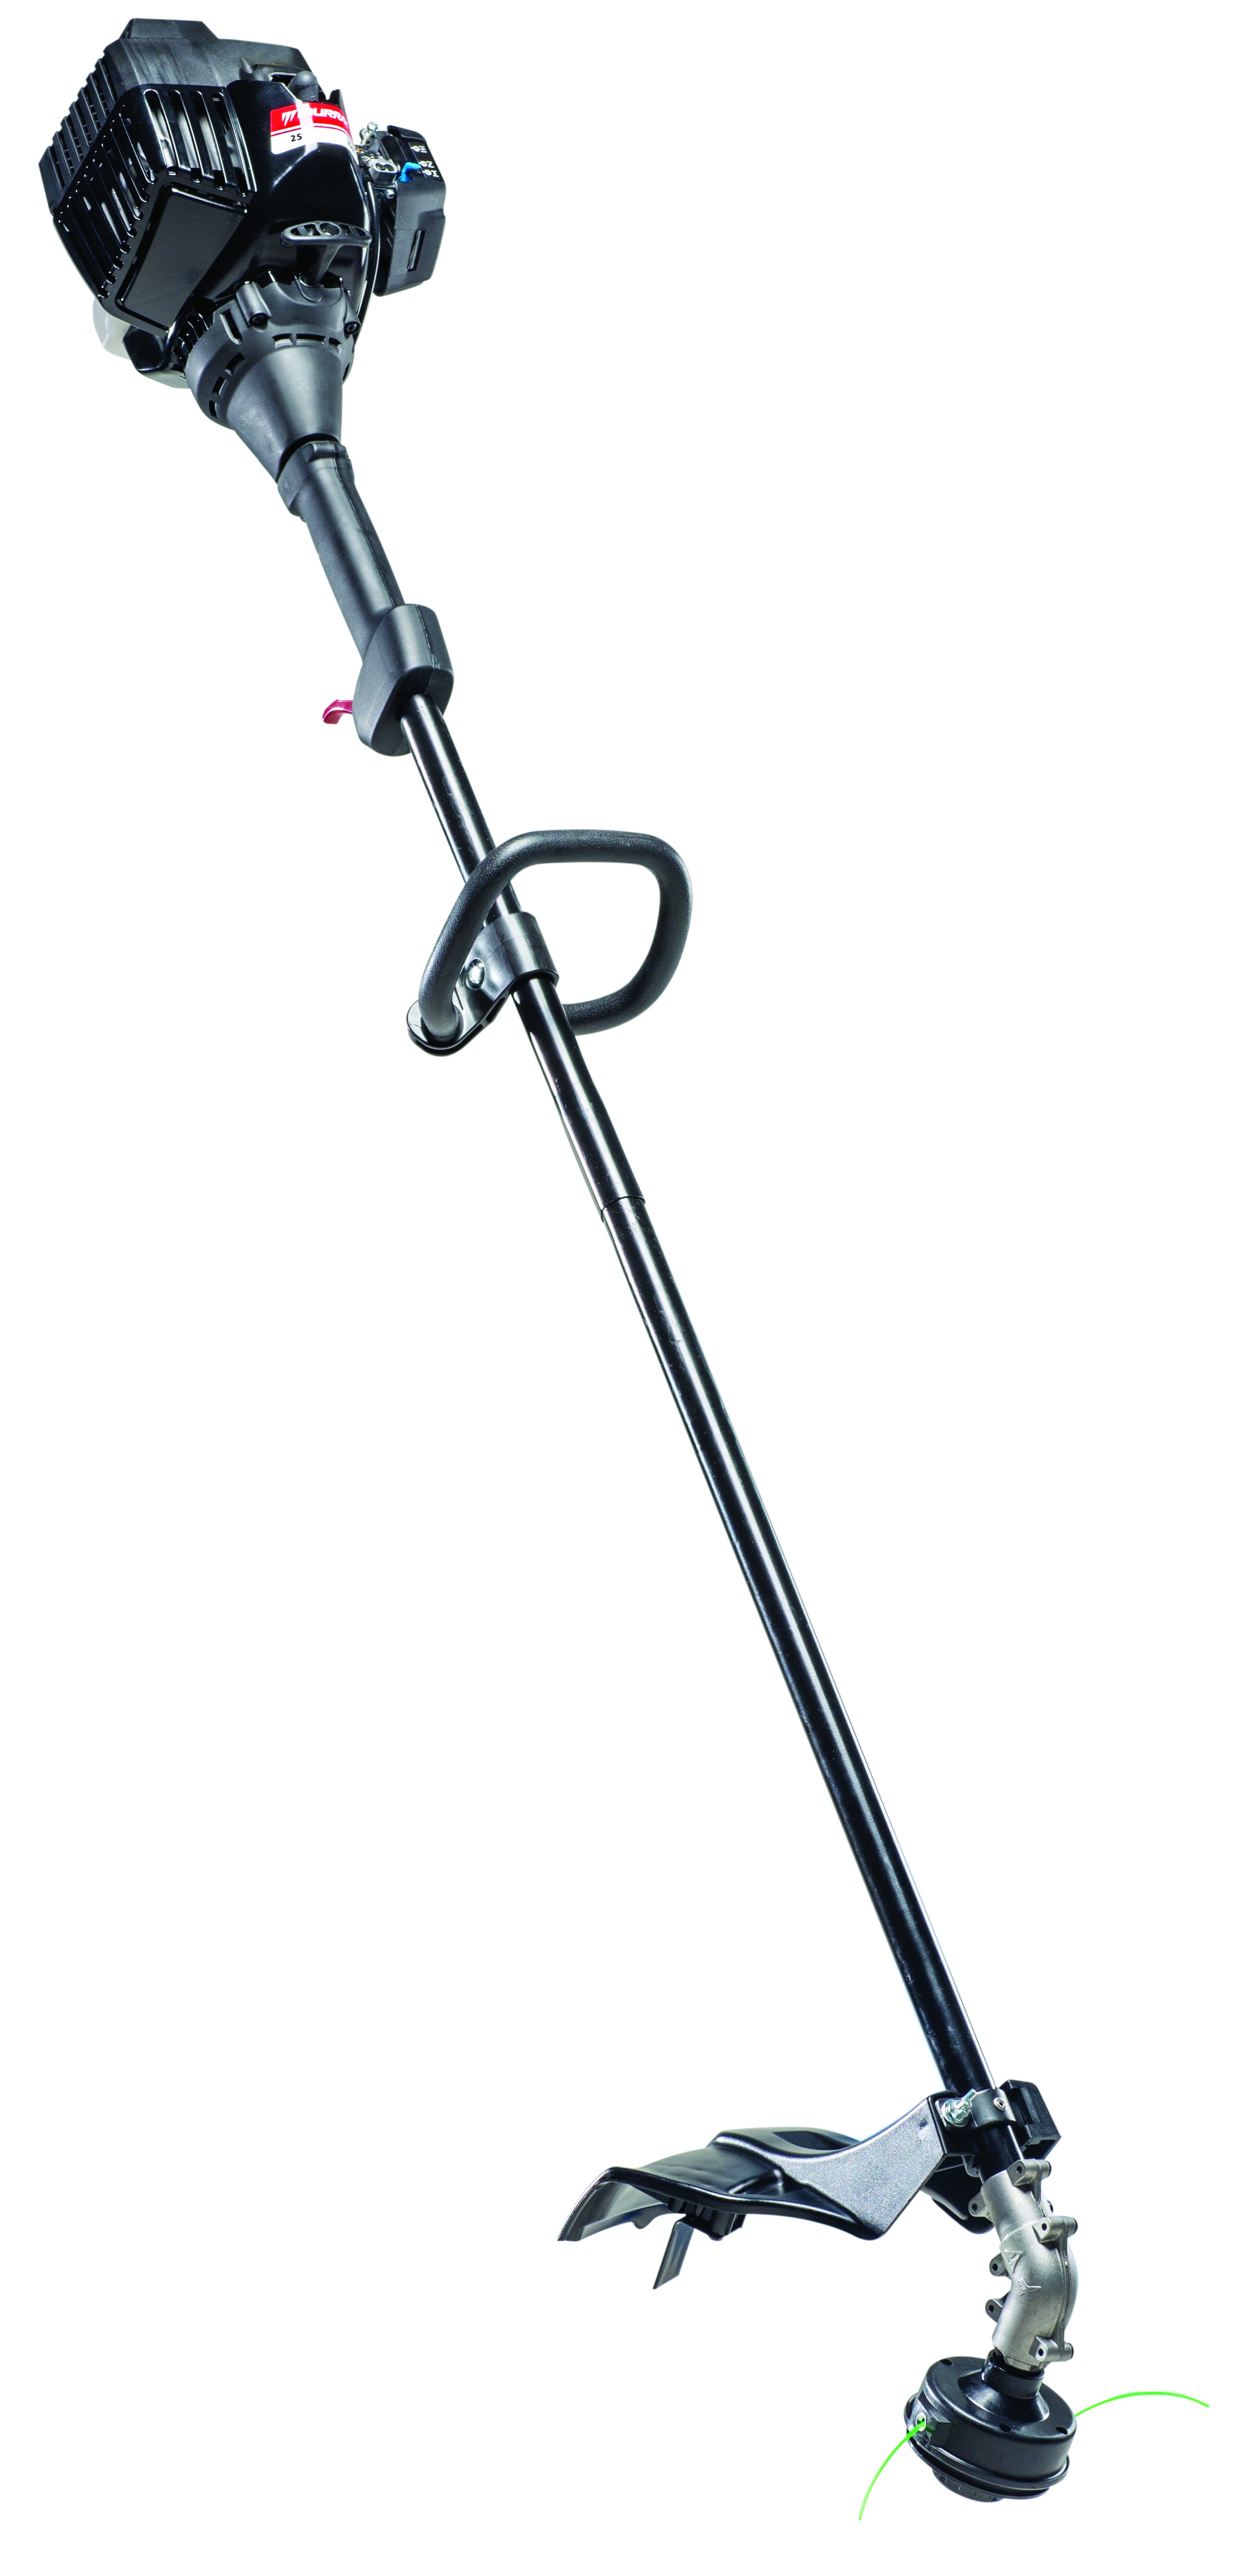 Murray 16" 2-Cycle 25cc Gas-Powered Straight Shaft String Trimmer - image 1 of 5